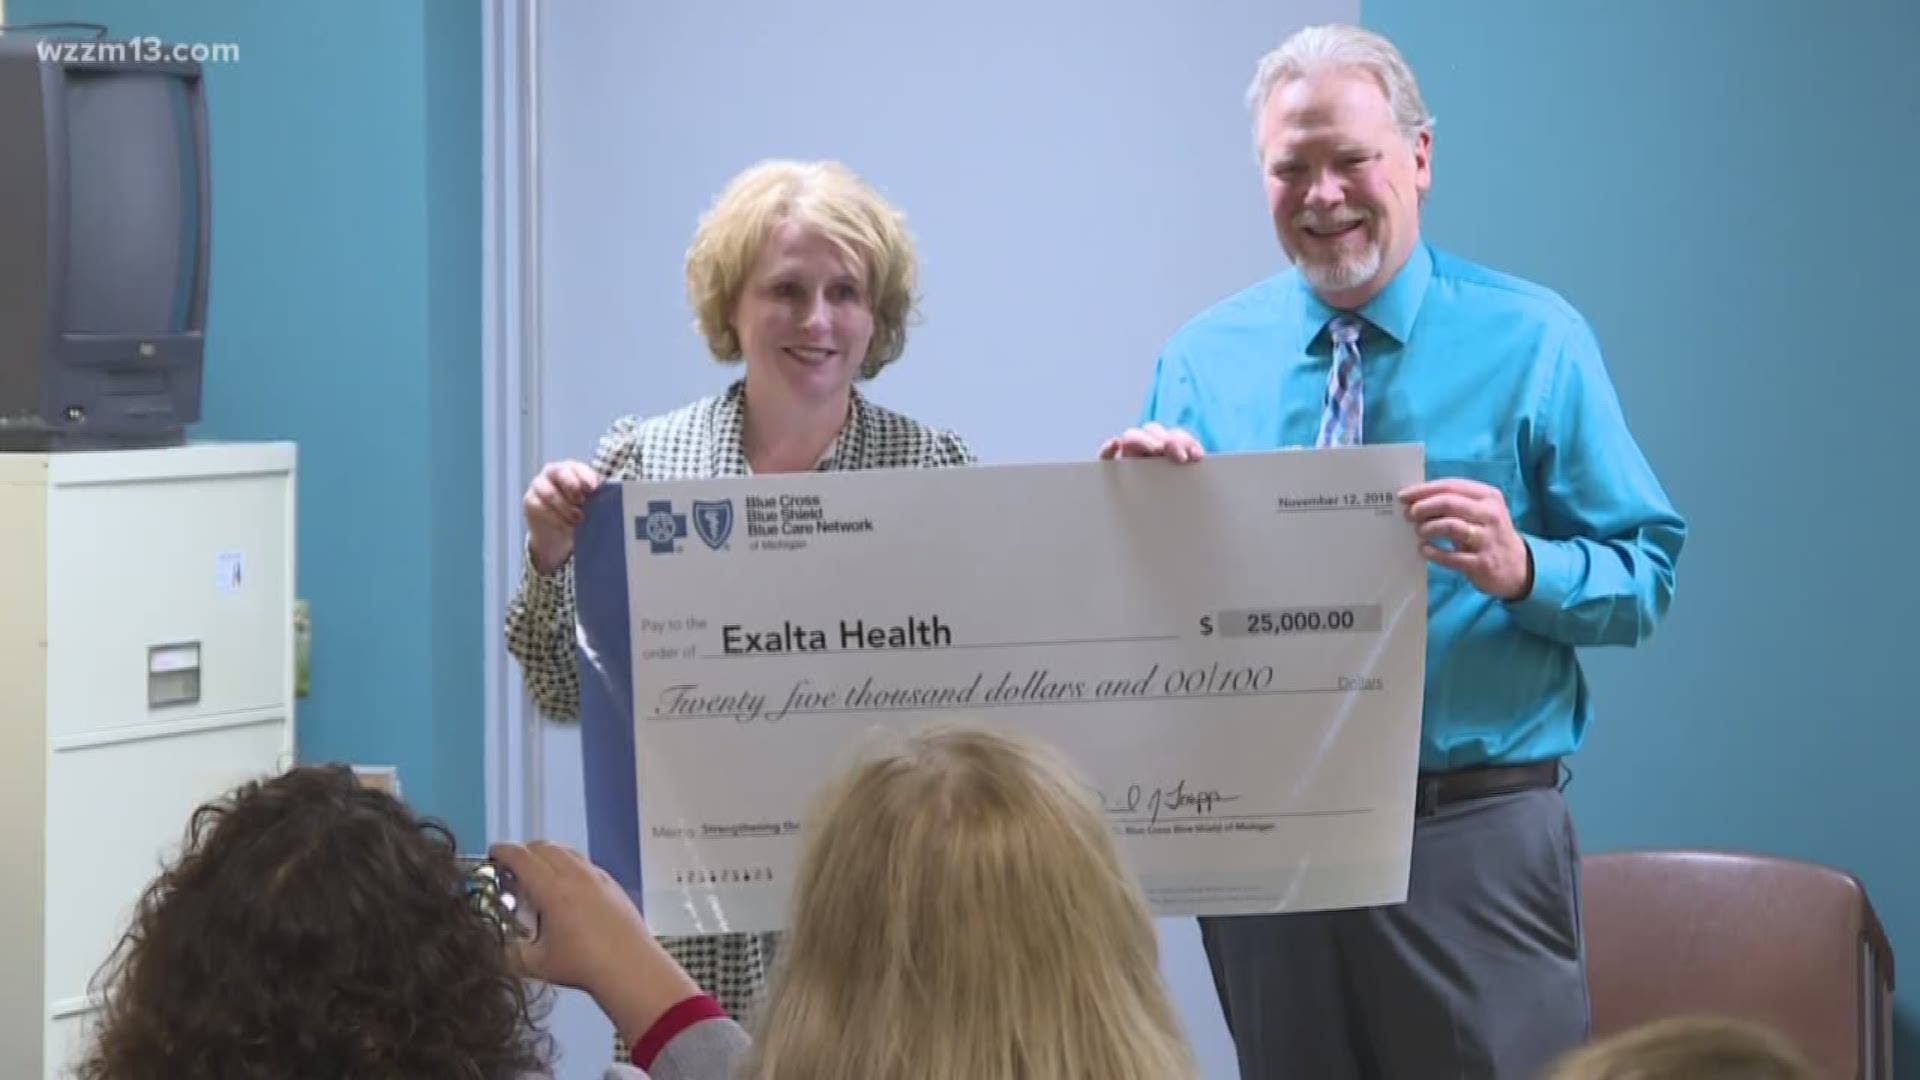 4 Grand Rapids clinics are getting grants to provide for the uninsured